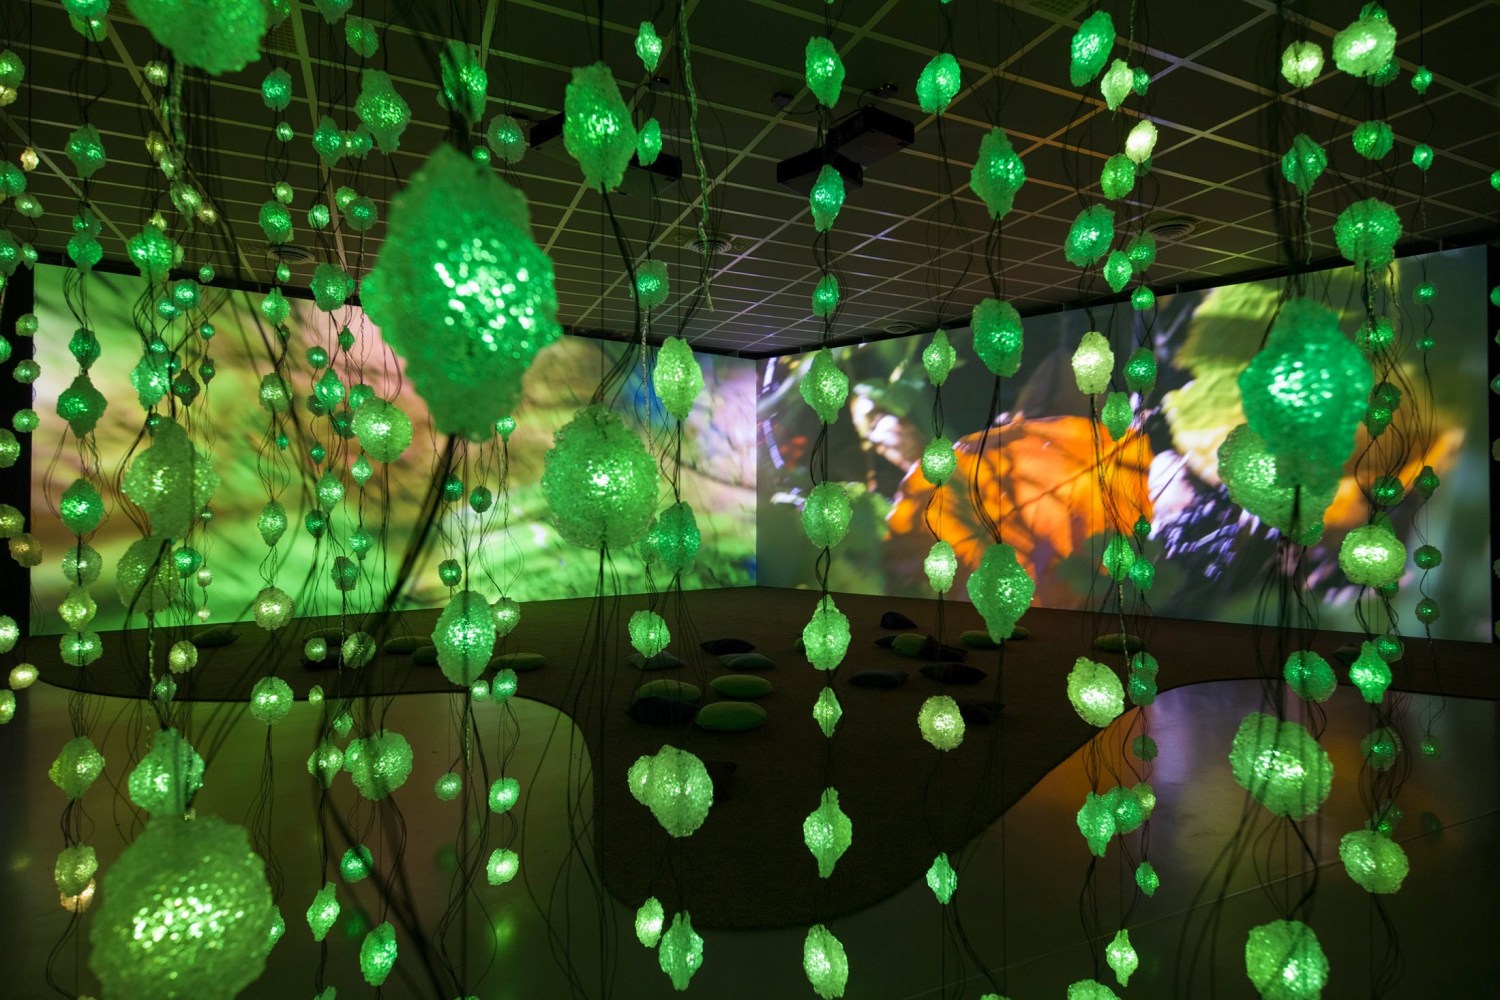 Pipilotti Rist
Pixelwald (Pixel Forest), 2016
Hanging LED light installation and media player
Duration: 35 minutes
Dimensions variable
Installation view, Kunsthaus Z&amp;uuml;rich, 2016